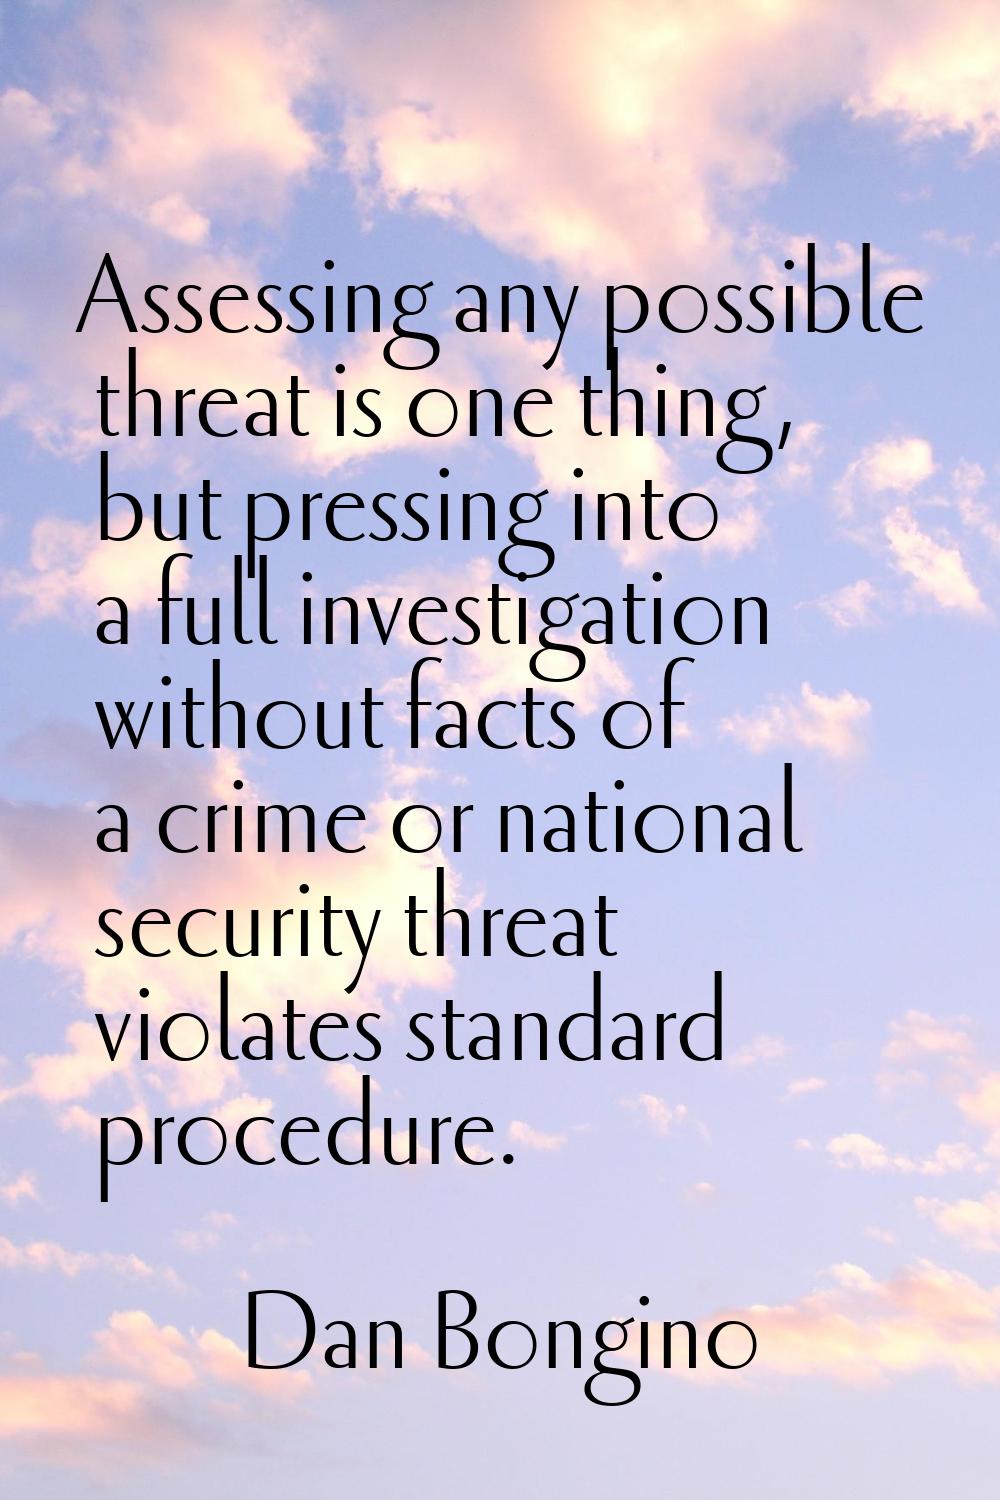 Assessing any possible threat is one thing, but pressing into a full investigation without facts of